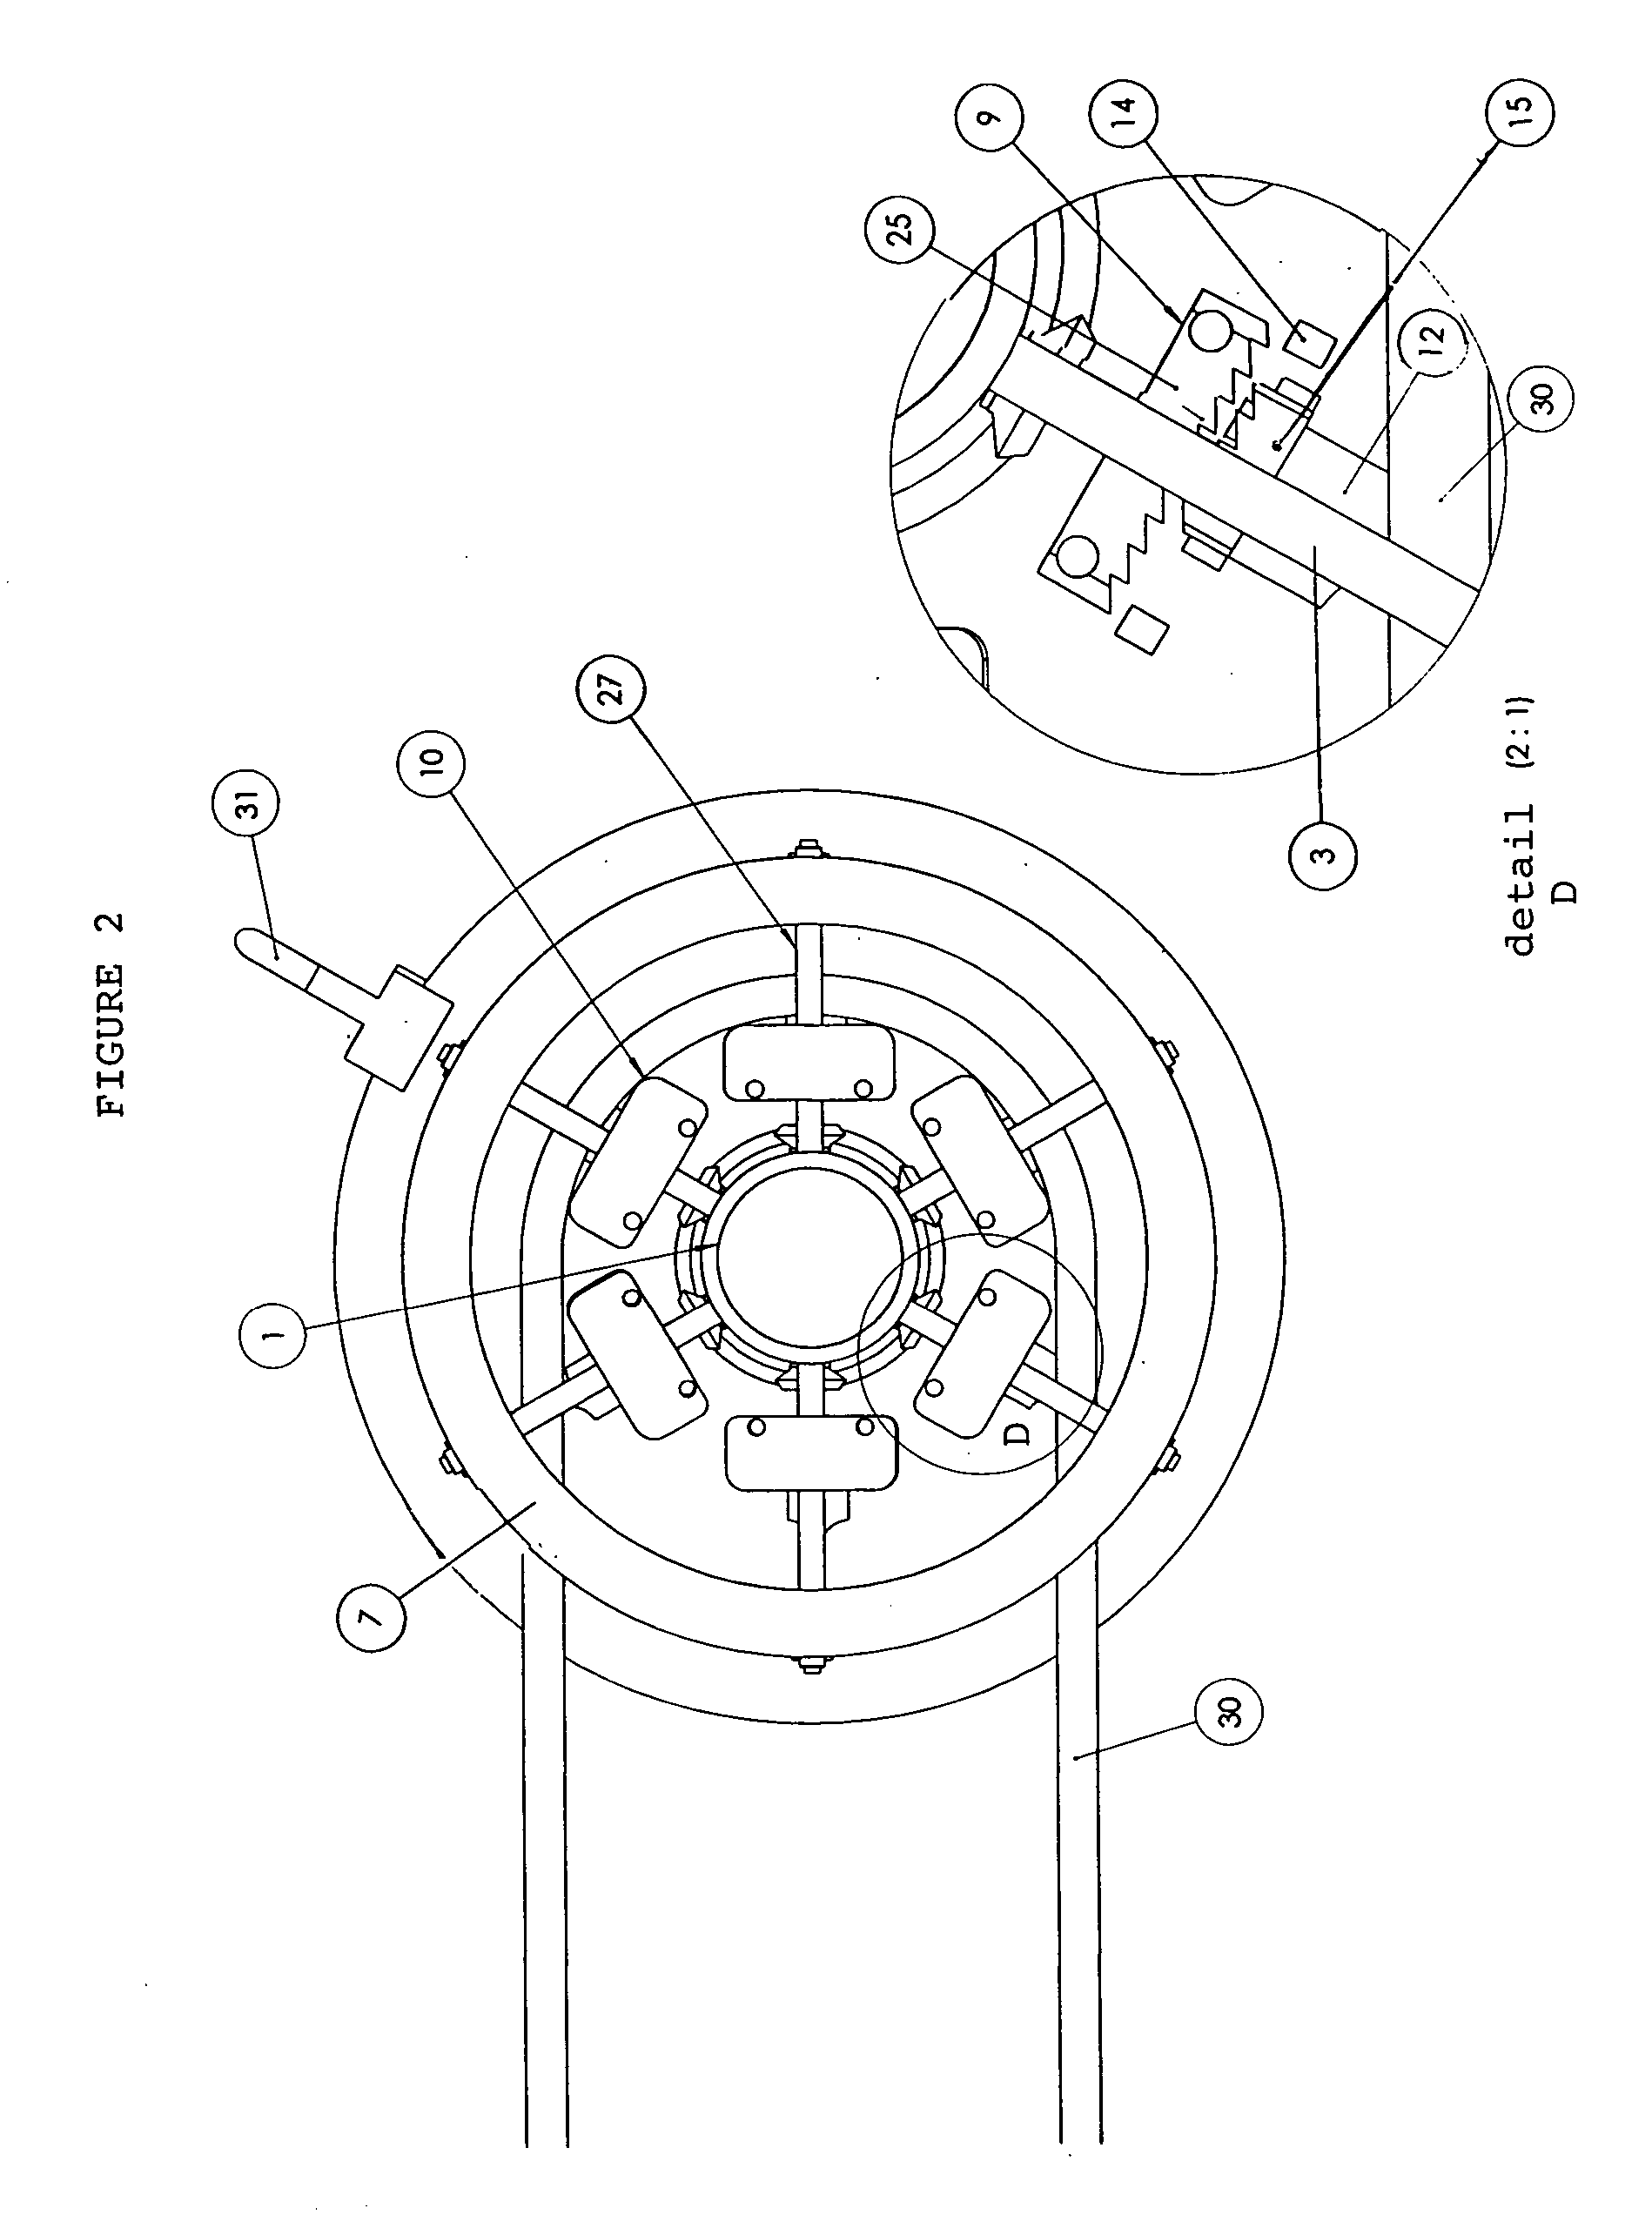 Variable radius continuously variable transmission